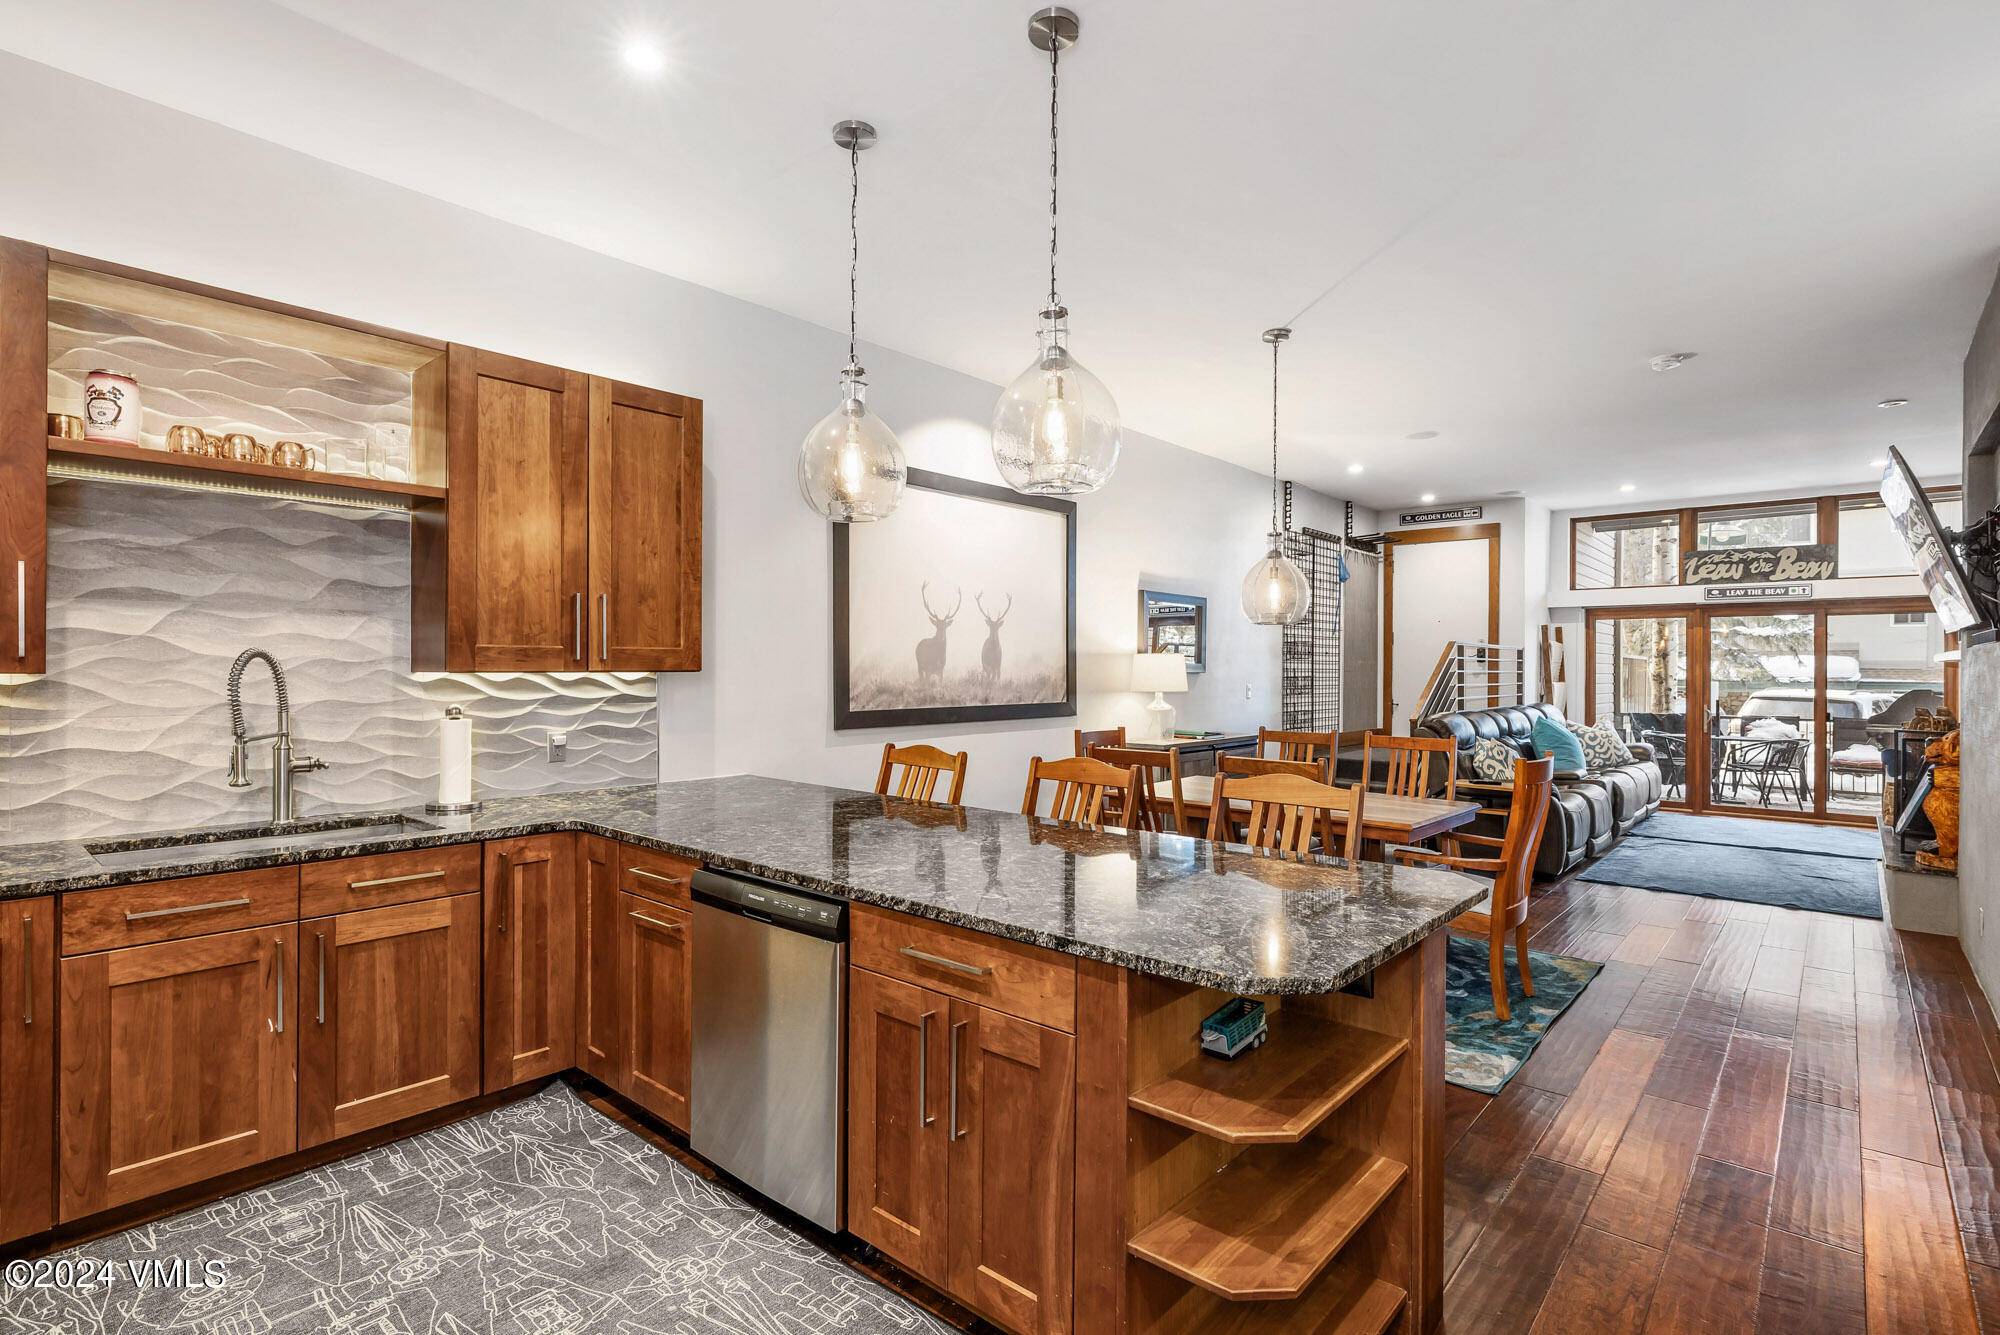 Nestled in the charming town of Avon, Colorado, this exquisite property offers an unparalleled lifestyle in a location that is truly second to none.